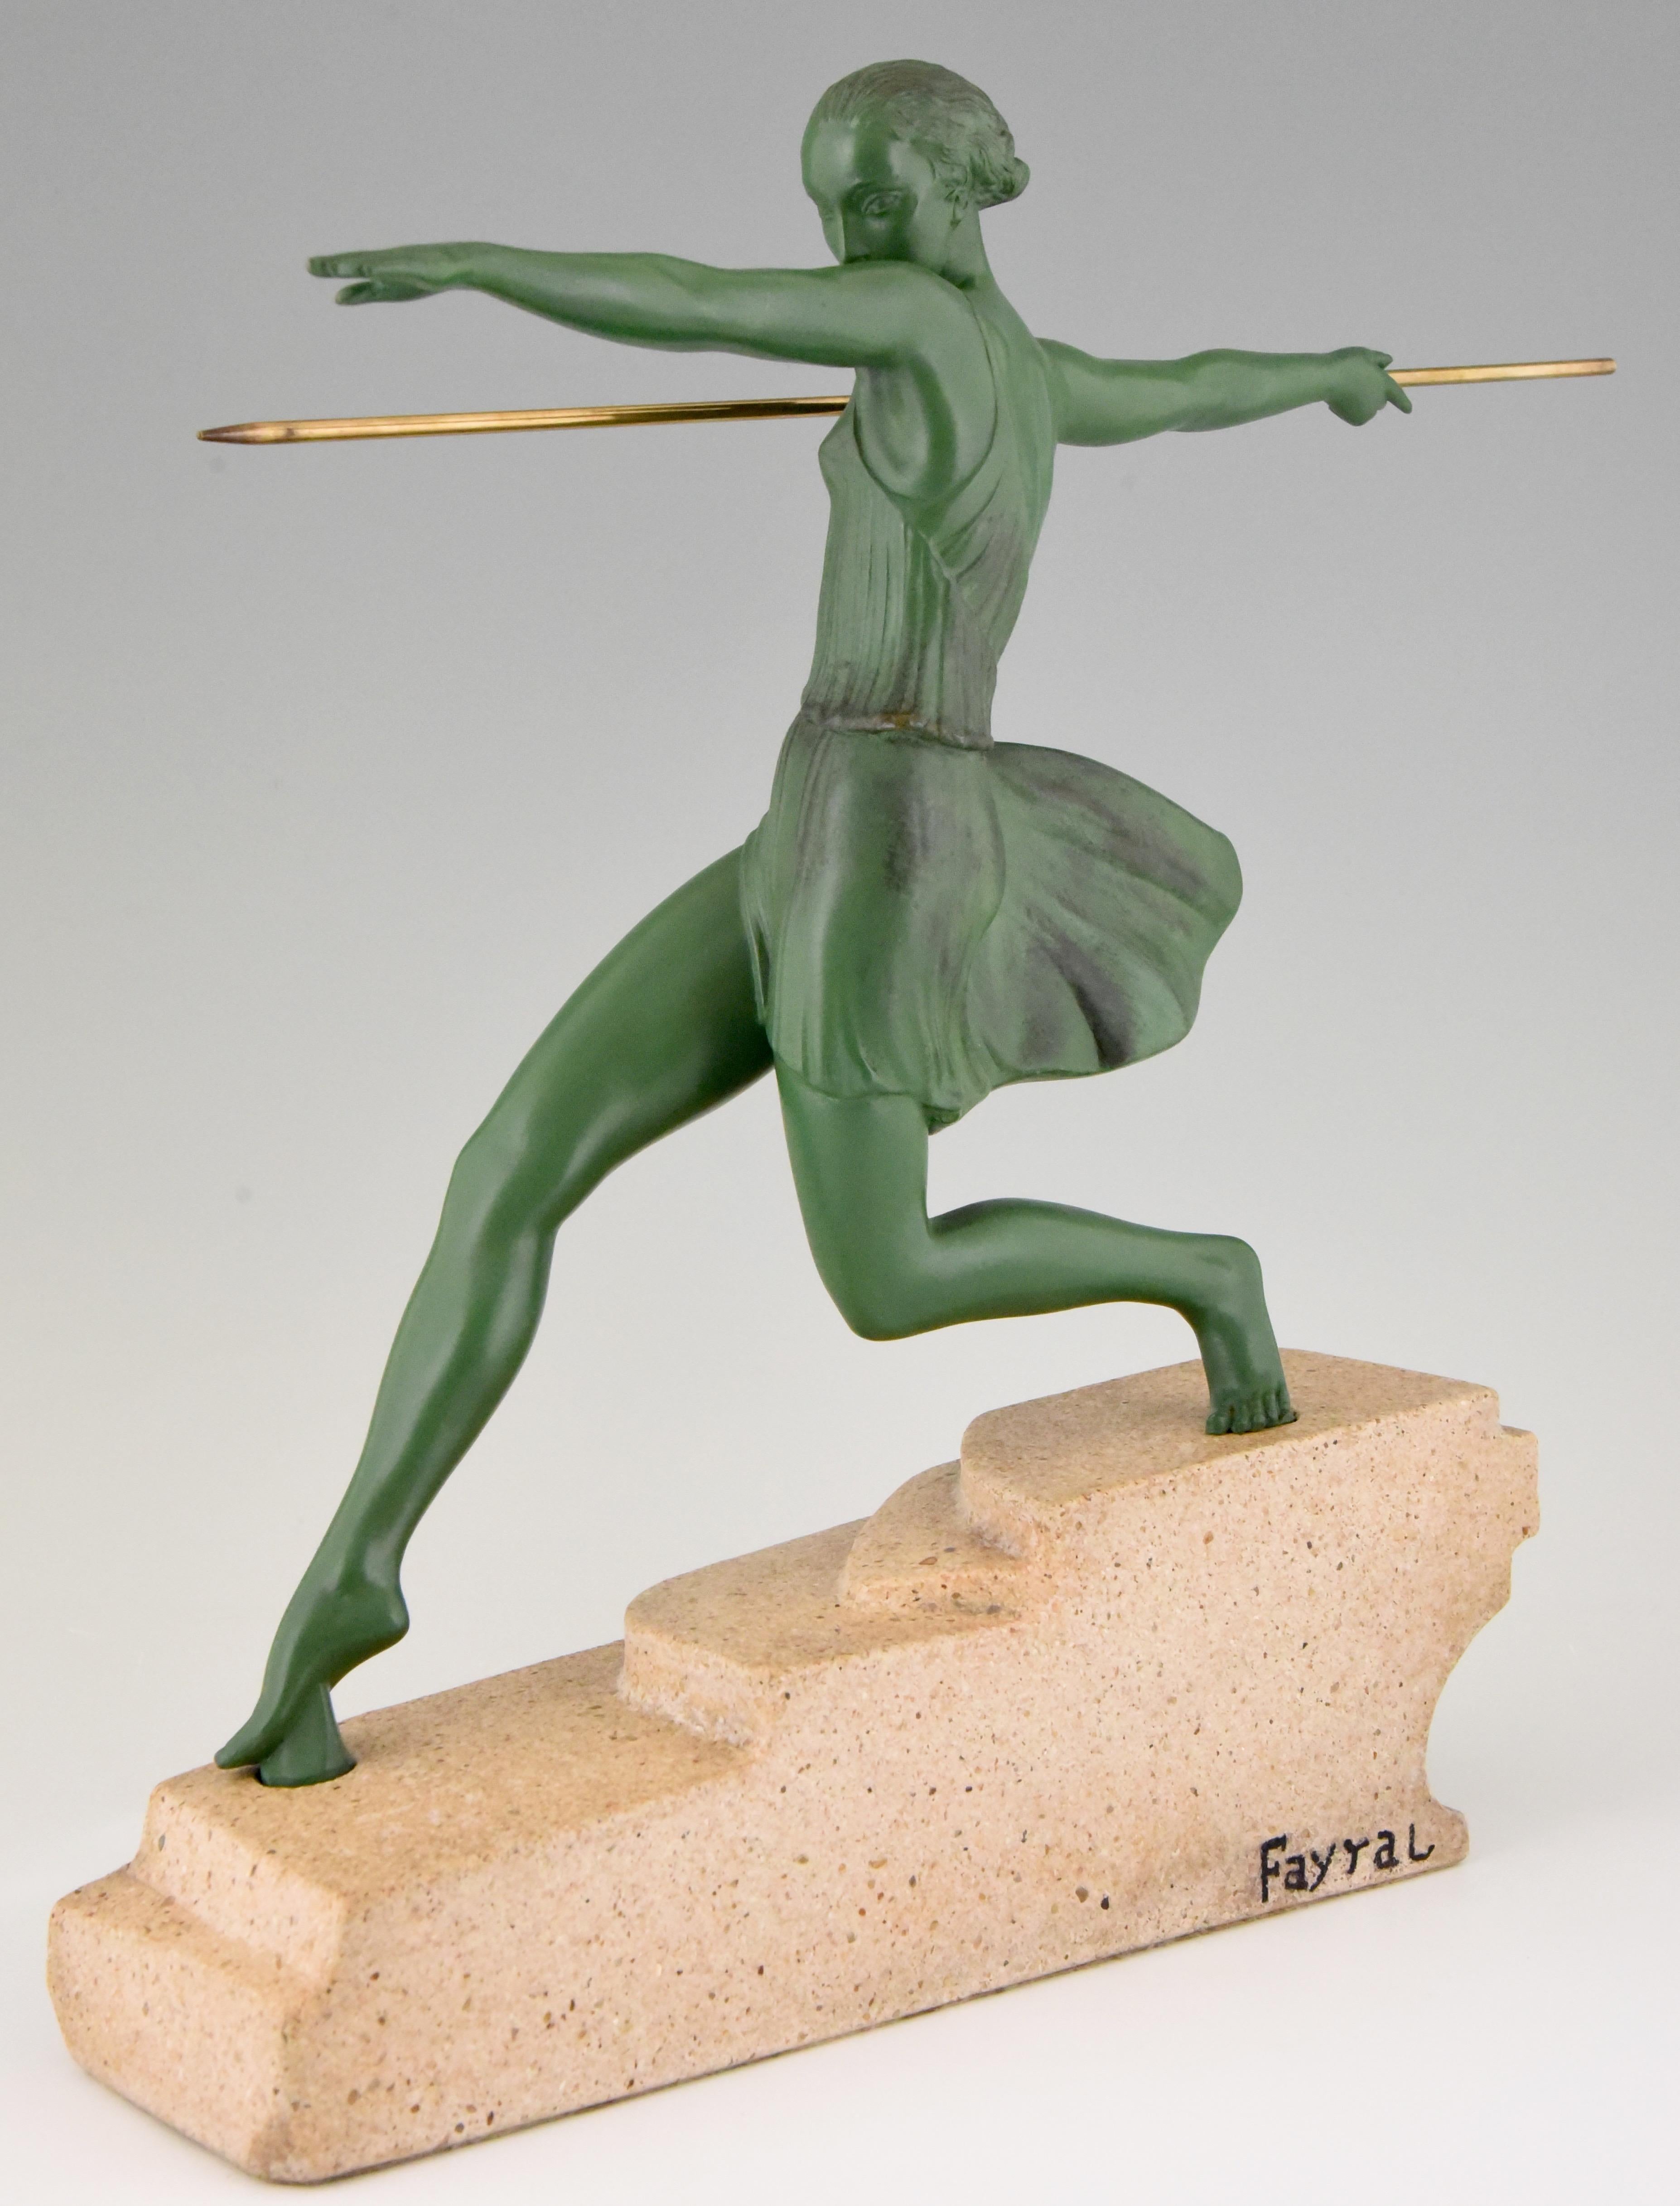 20th Century Art Deco Sculpture Female Javelin Thrower Fayral, Pierre Le Faguays